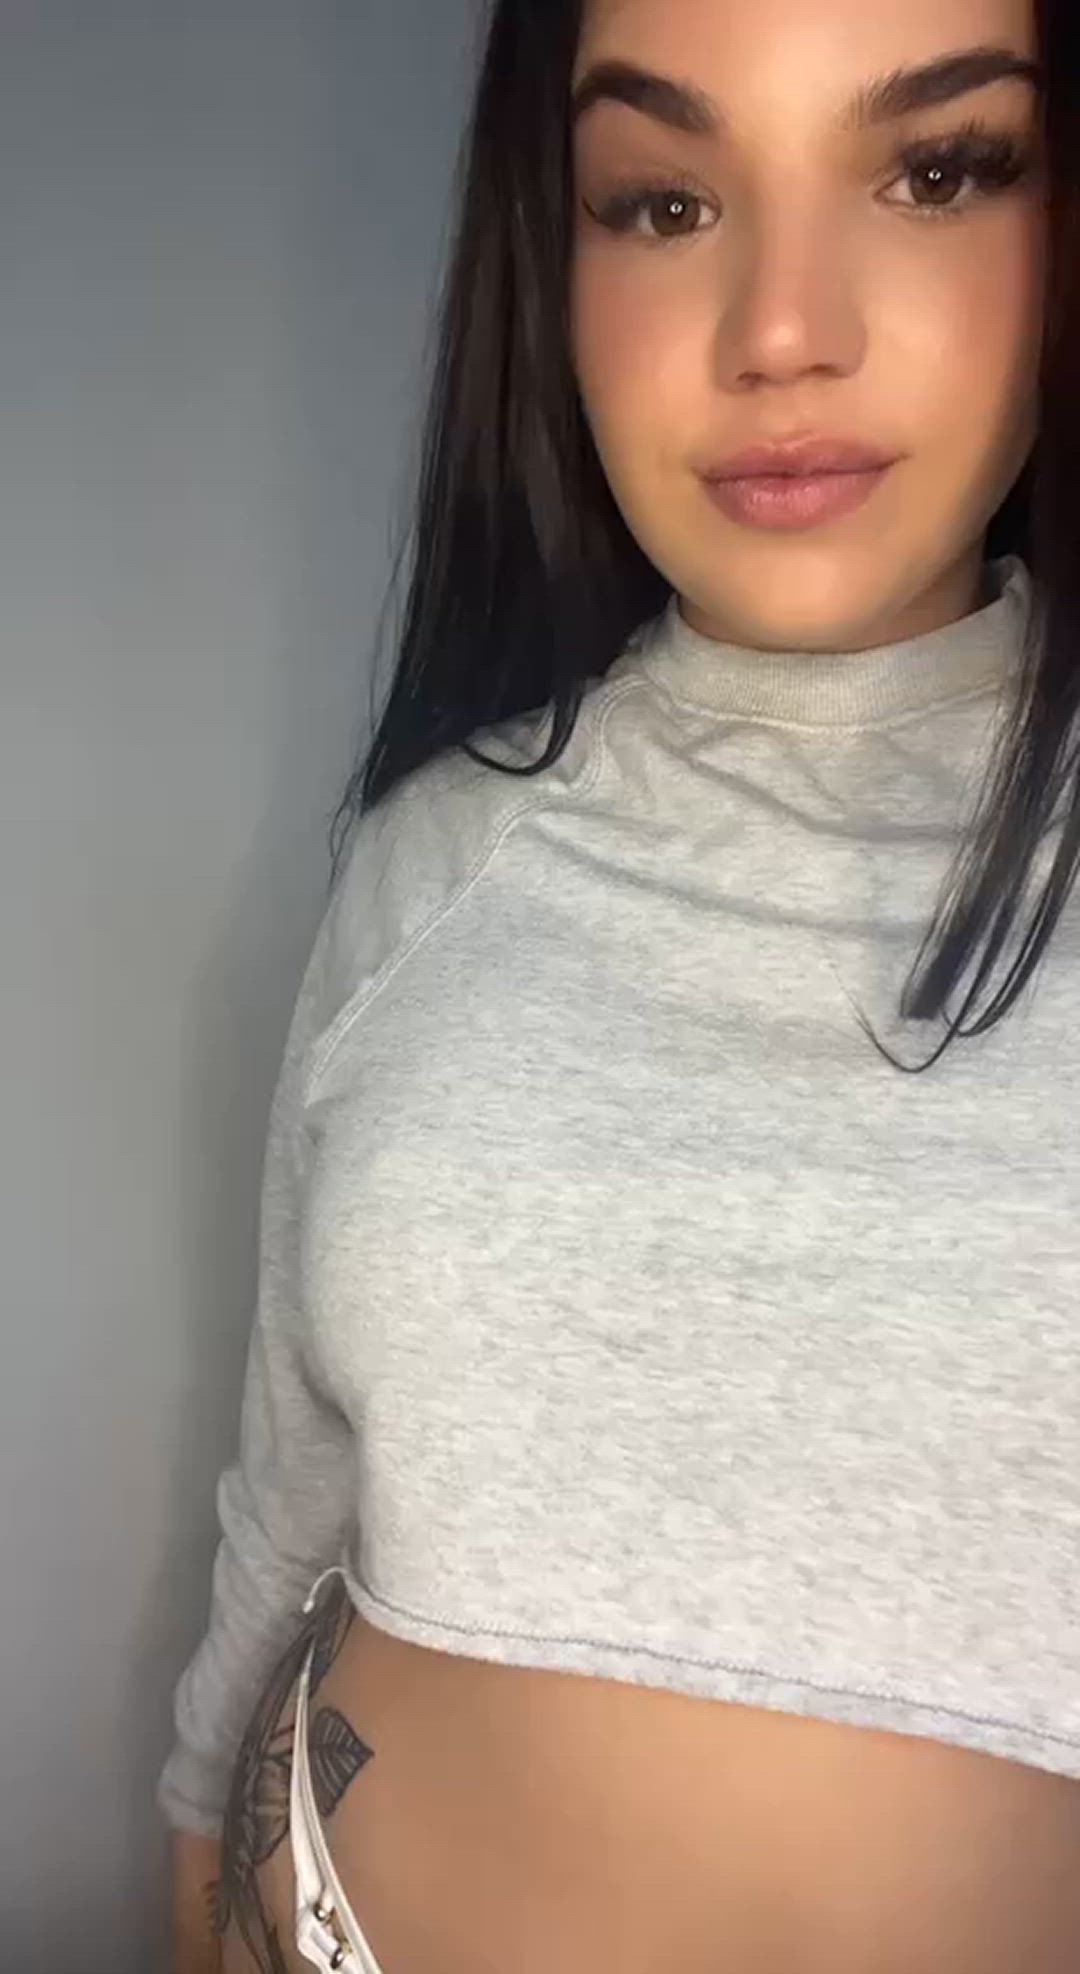 Tits porn video with onlyfans model curvy2kim <strong>@curvy.kim</strong>